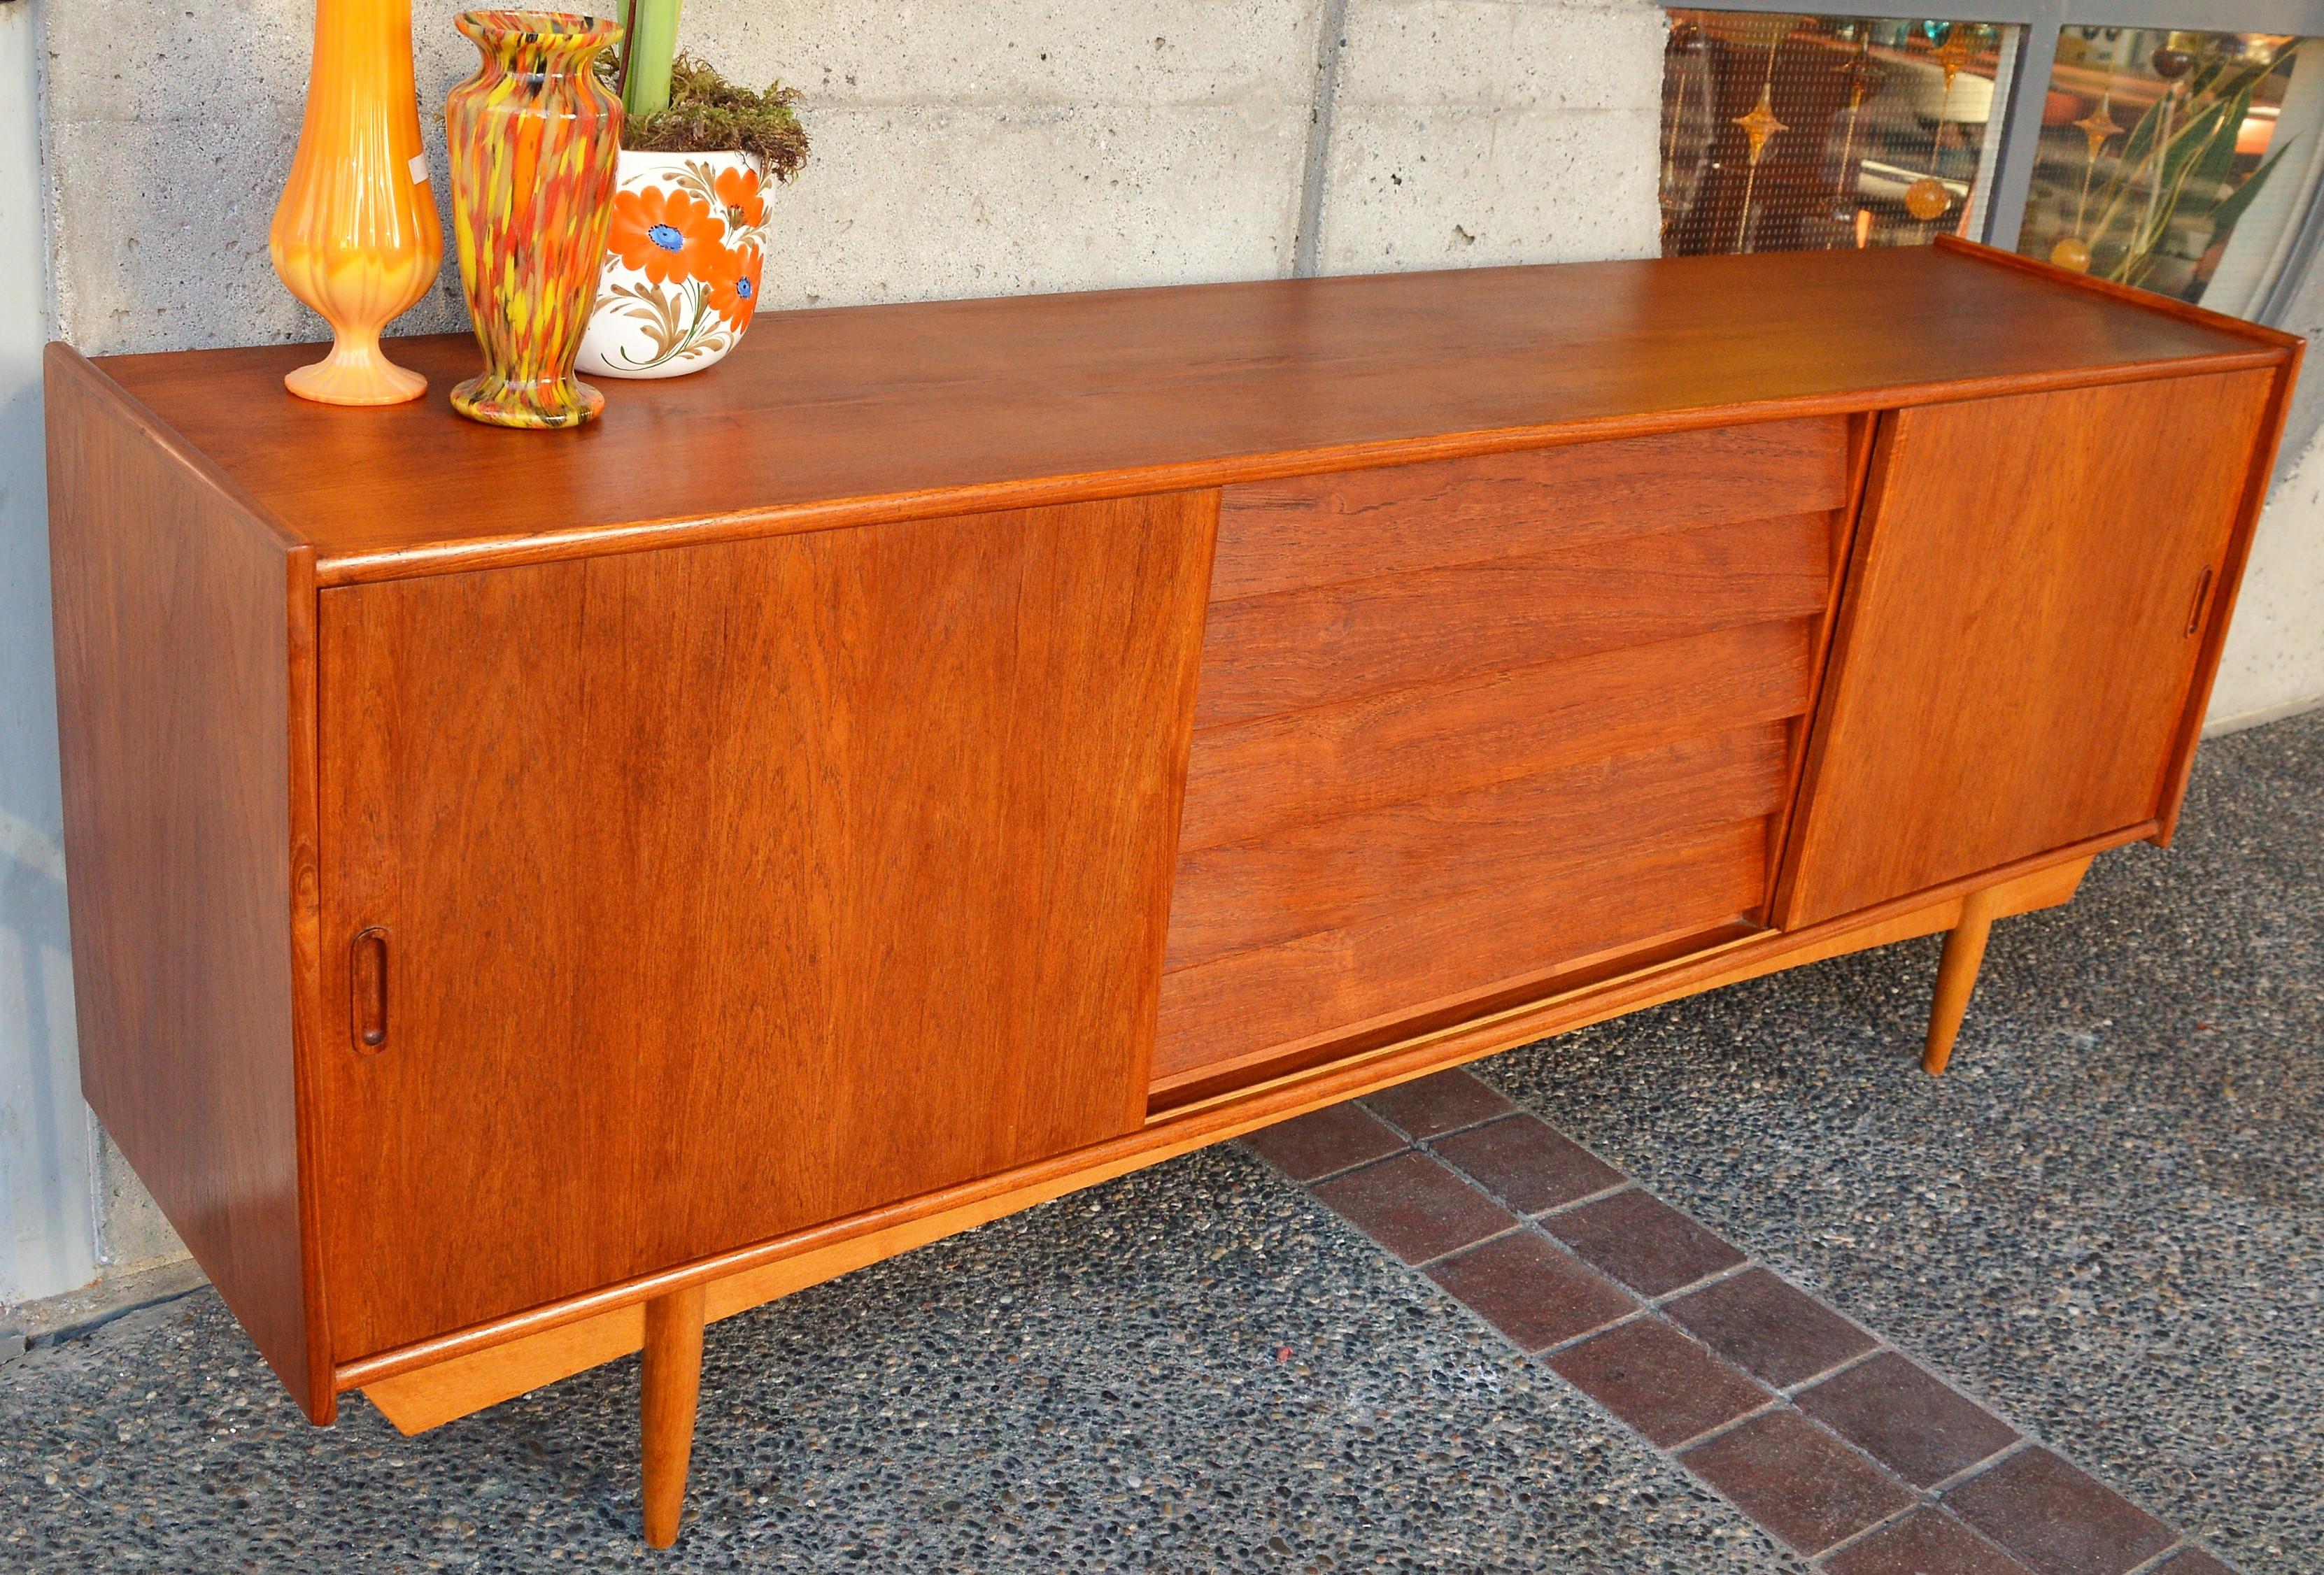 This spectacular Danish modern teak credenza buffet has a rich wonderful patina that contrasts beautifully with the sculptural oak base apron and conical legs. The centre bank of drawers are all wood frame construction with dovetail joints and have